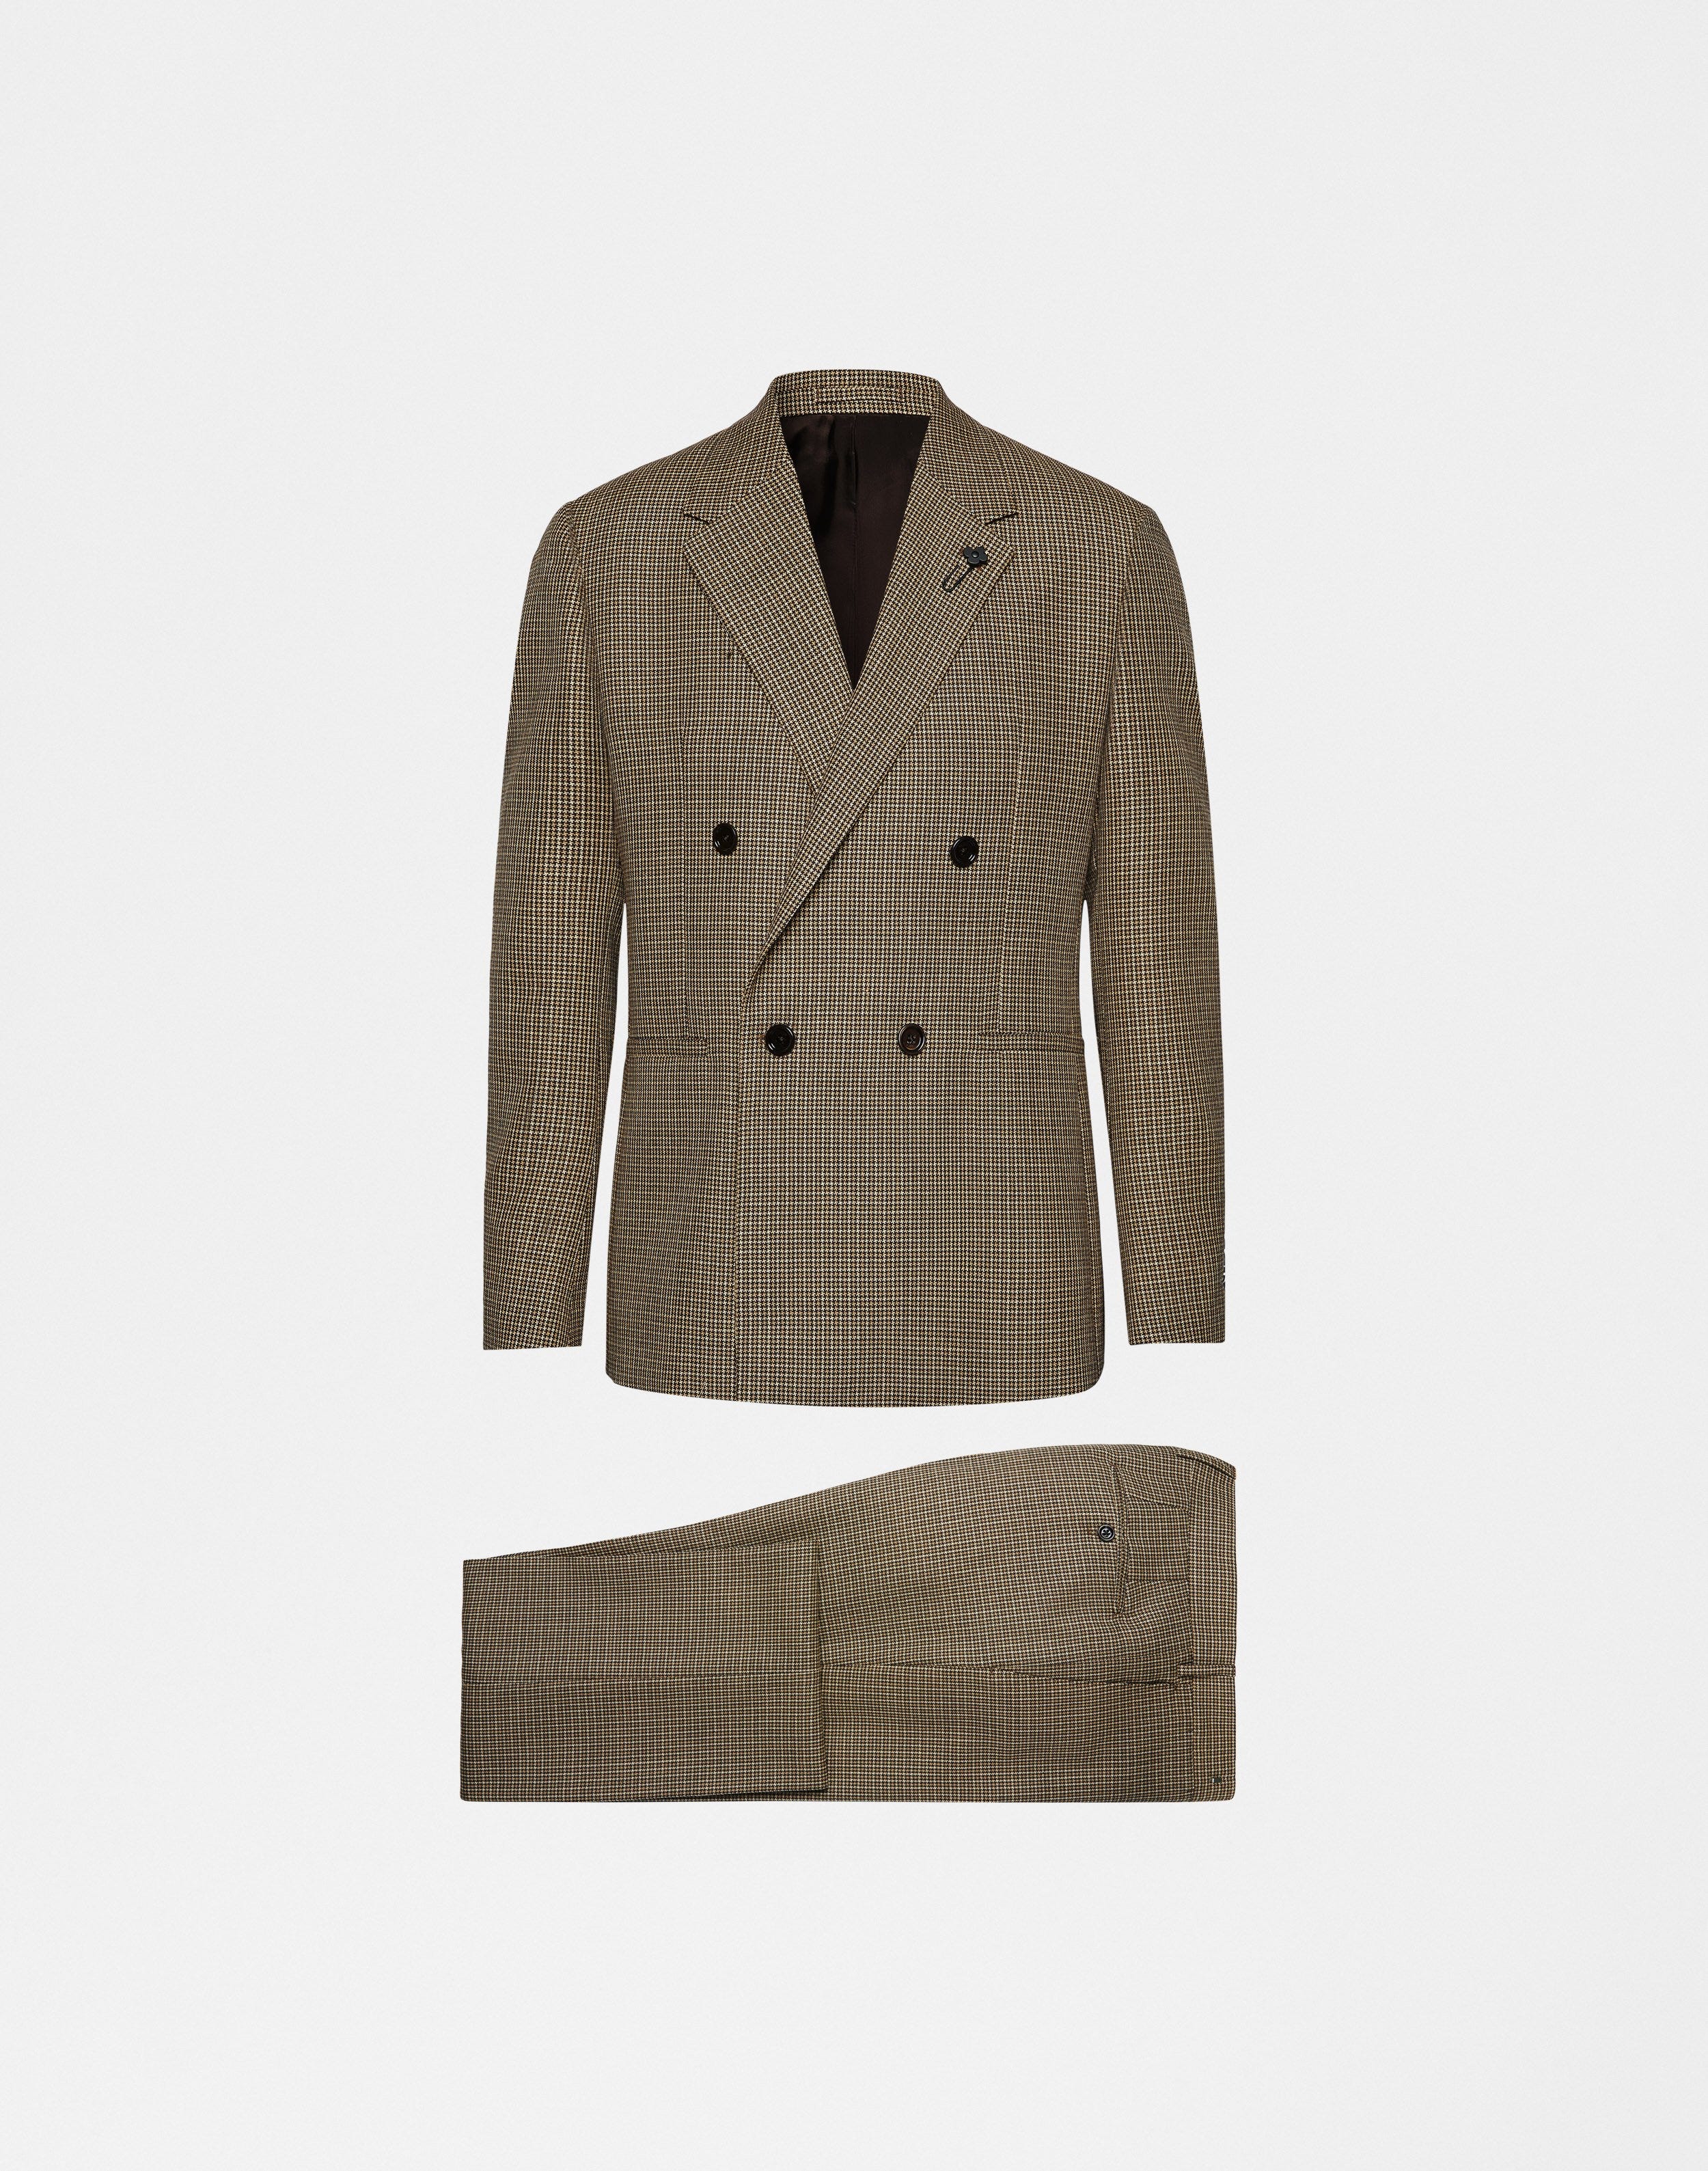 Beige and brown suit with micro pattern